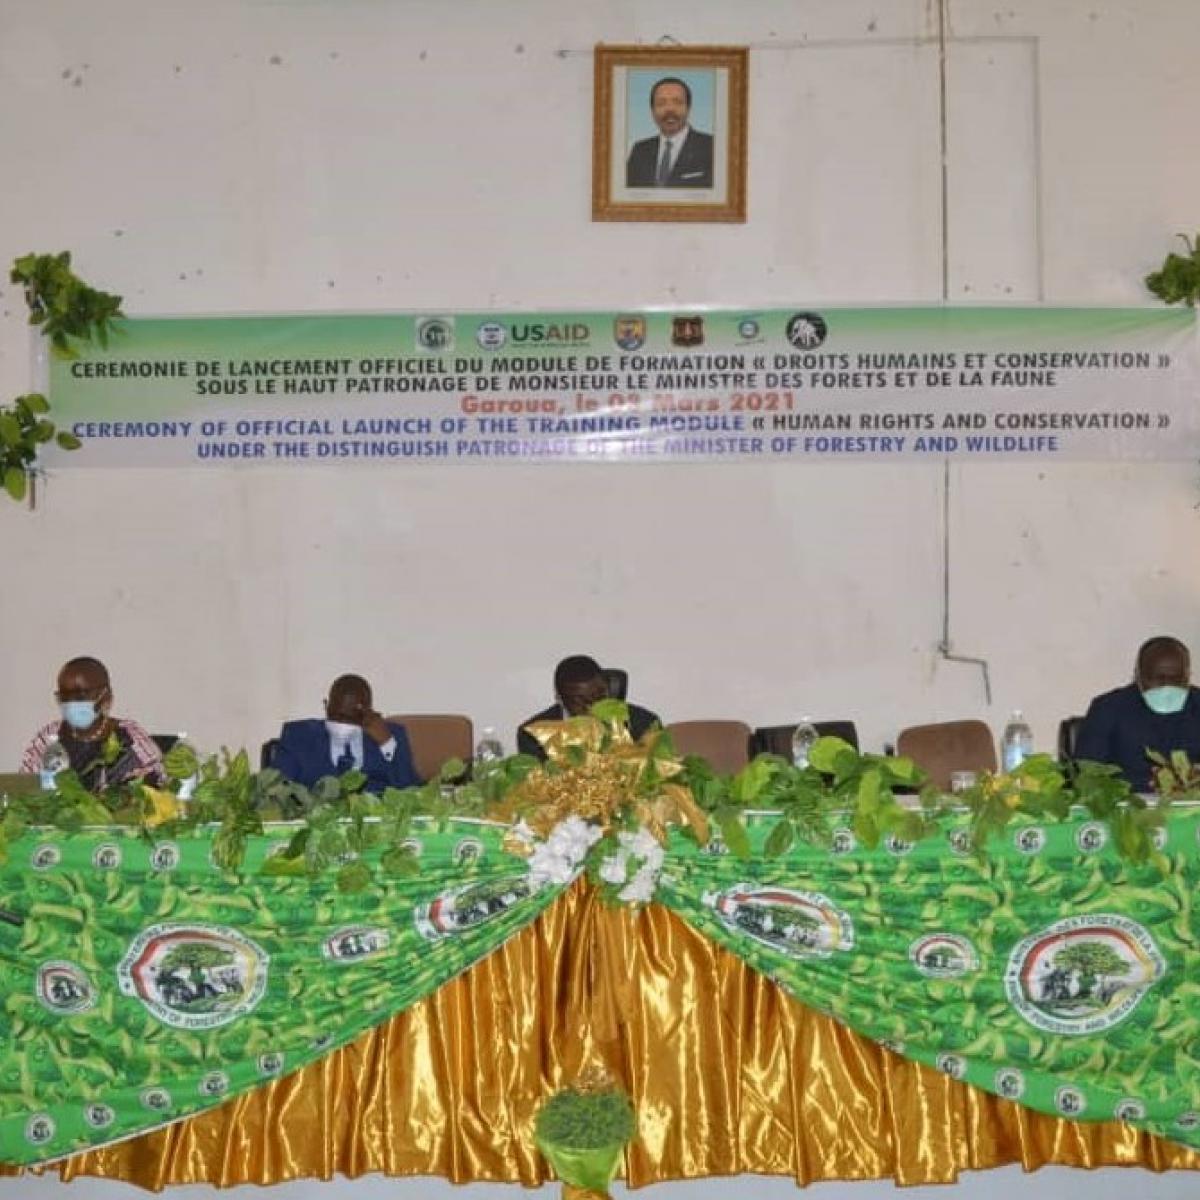 New human rights and conservation curriculum in Cameroon aims to educate conservation practitioners on the importance of protecting human rights.